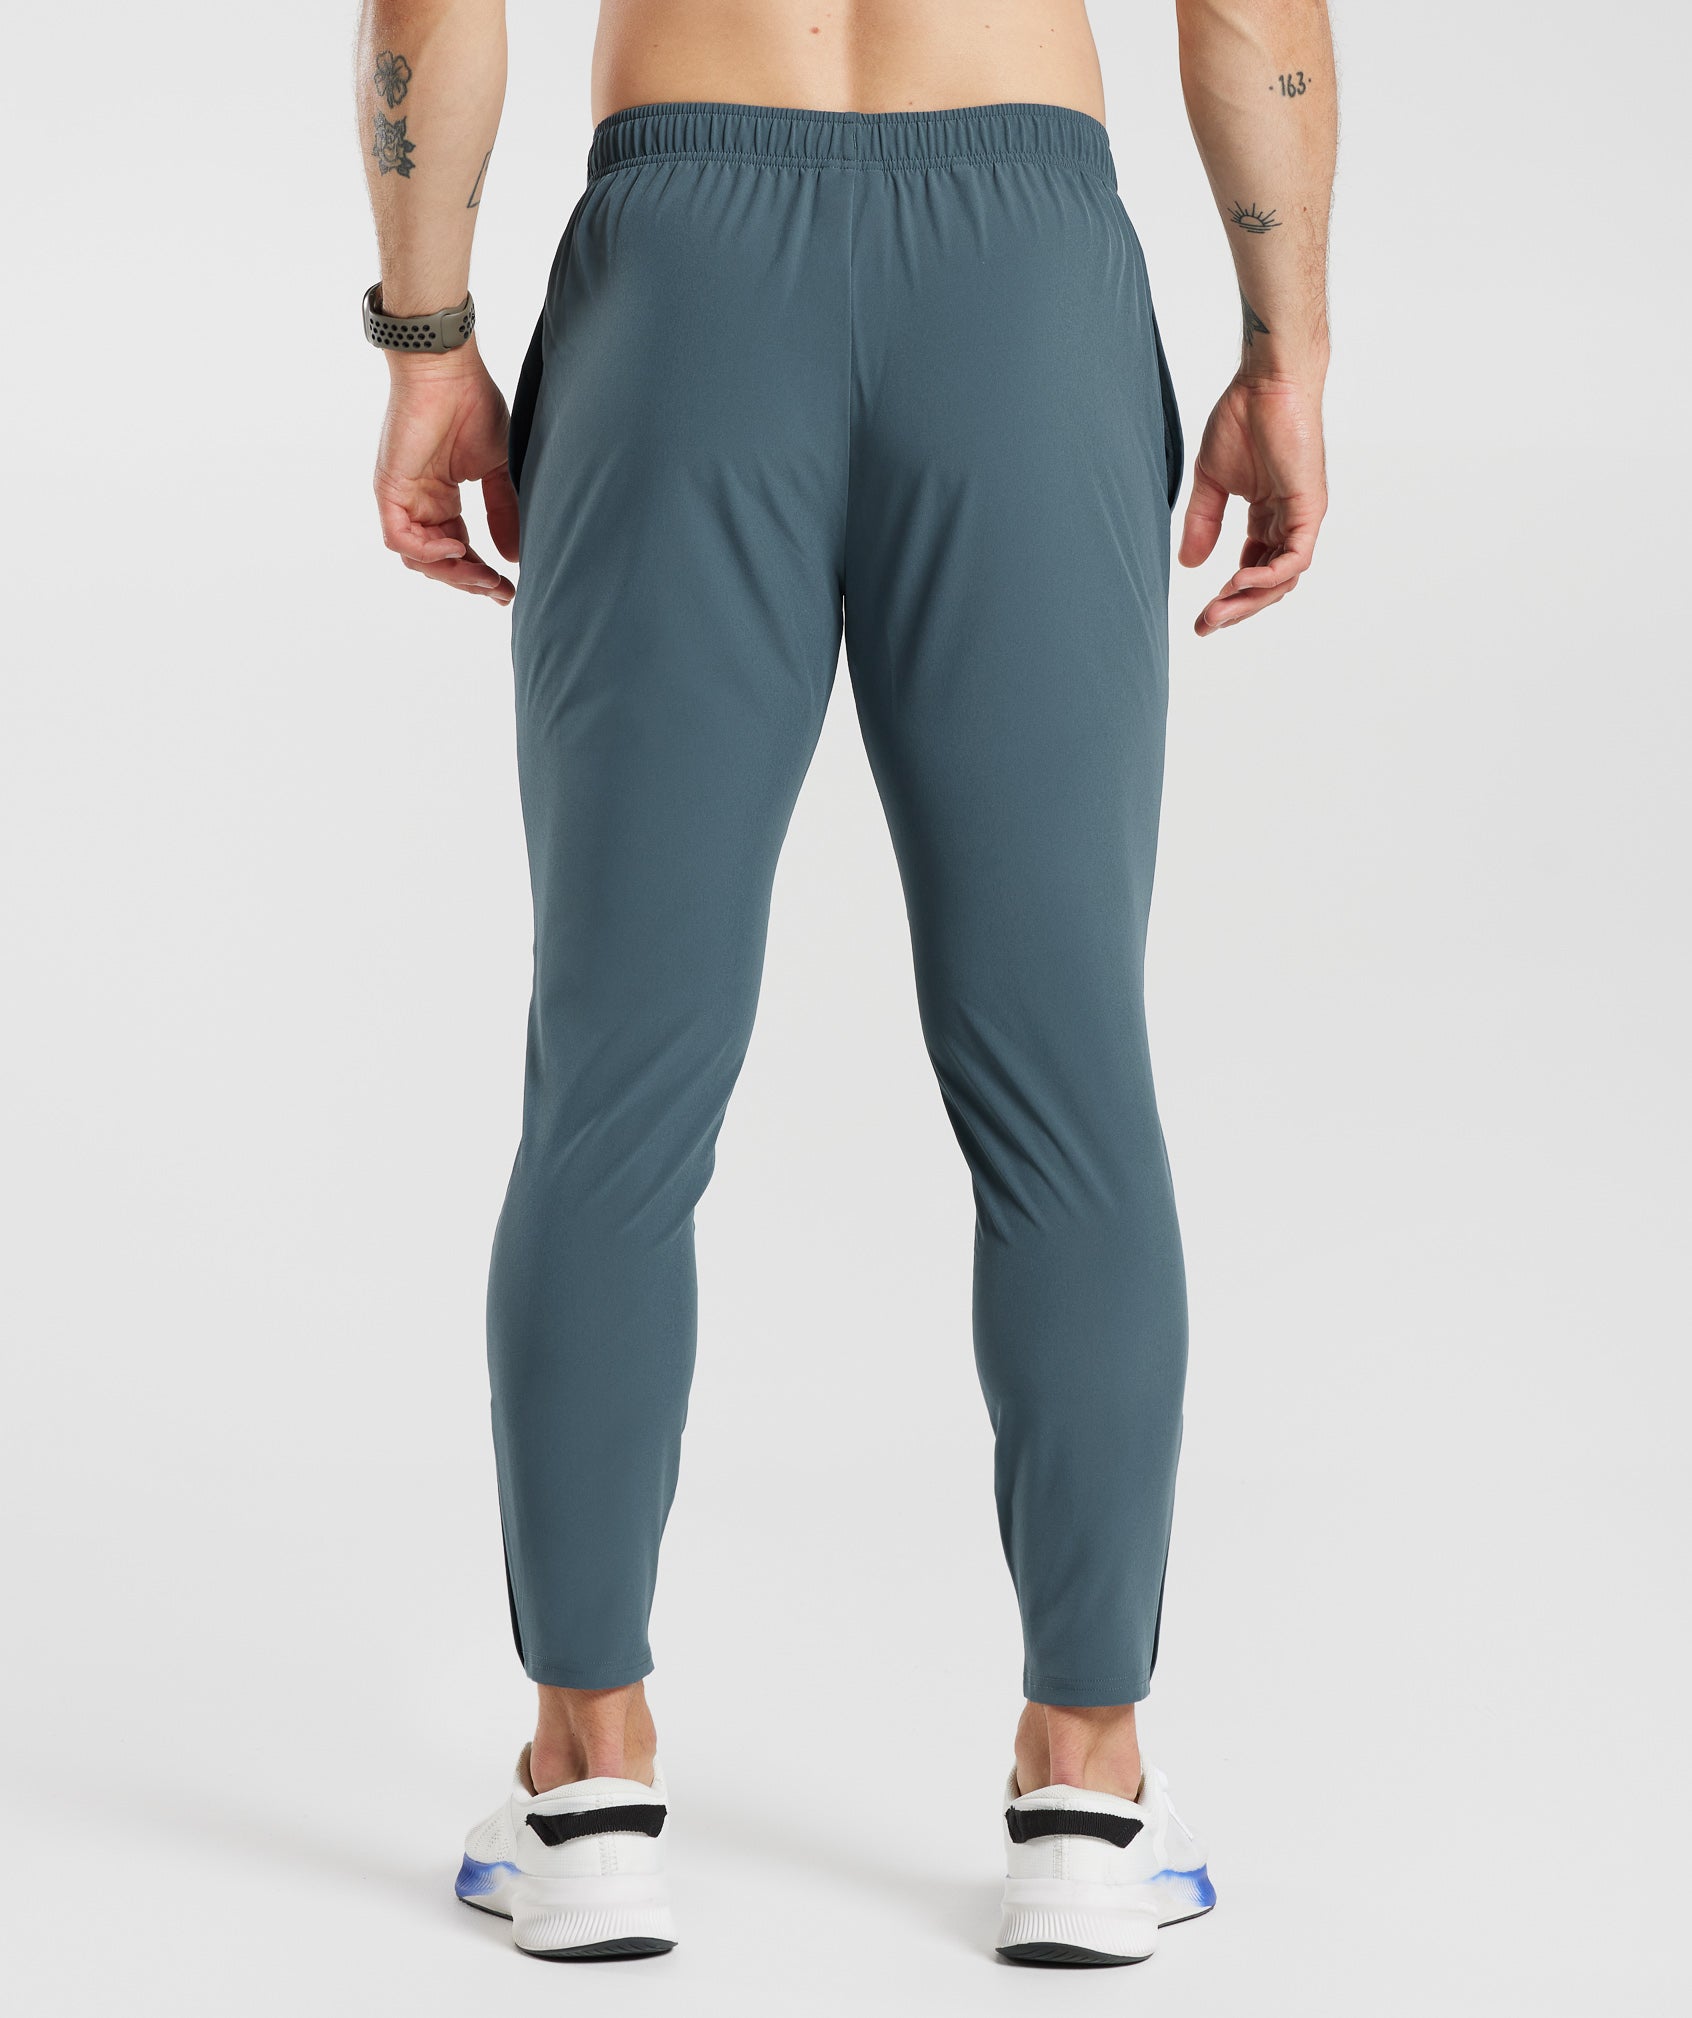 Arrival Jogger in Smokey Teal - view 2